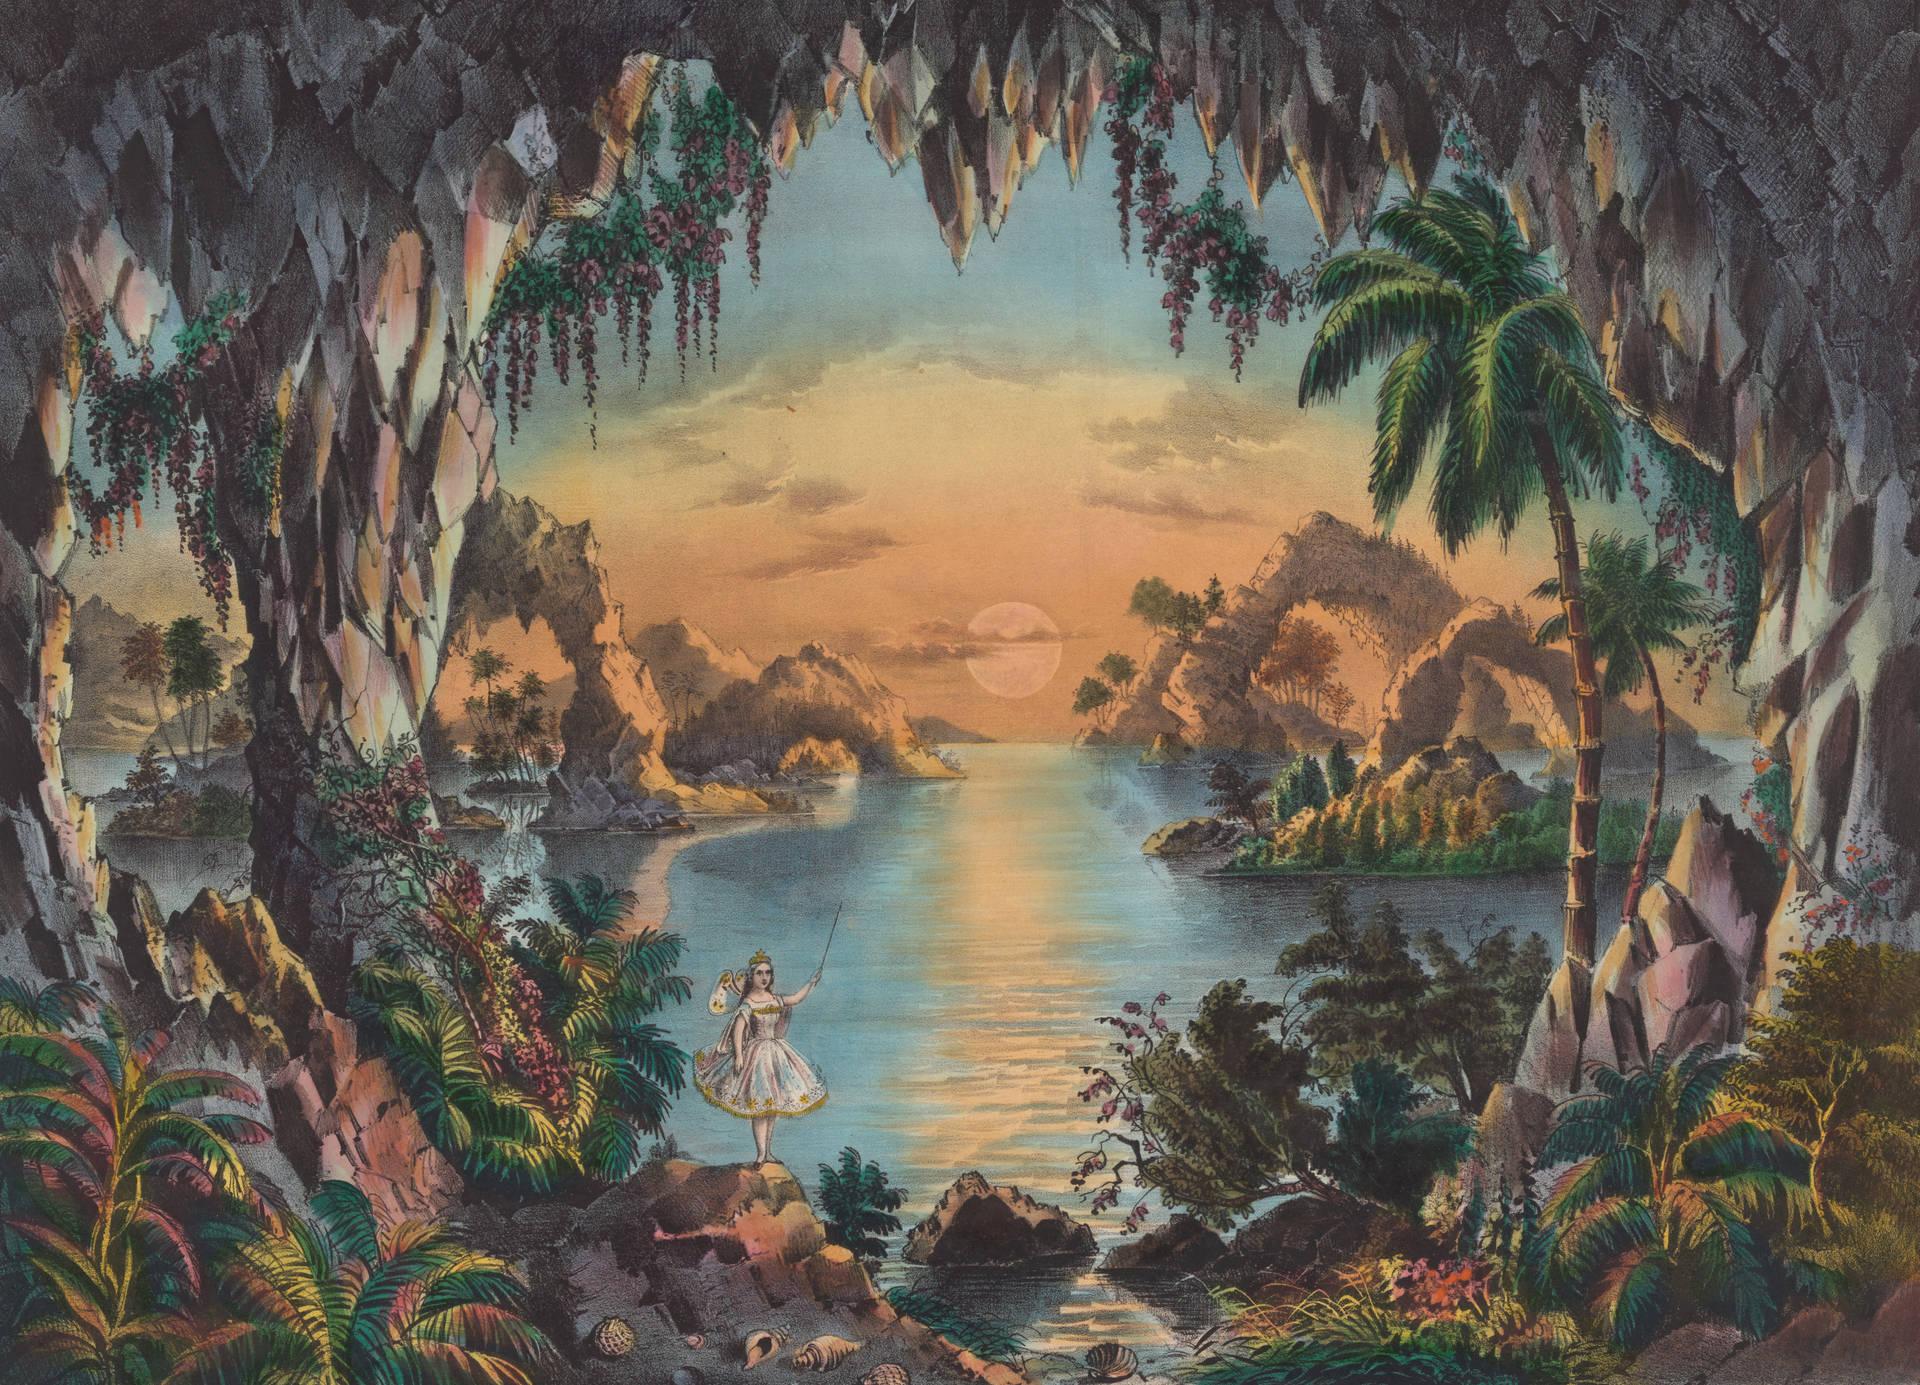 Digital art of forest with rocky cave and a fairy standing in front of water streams showing a fantasy land.